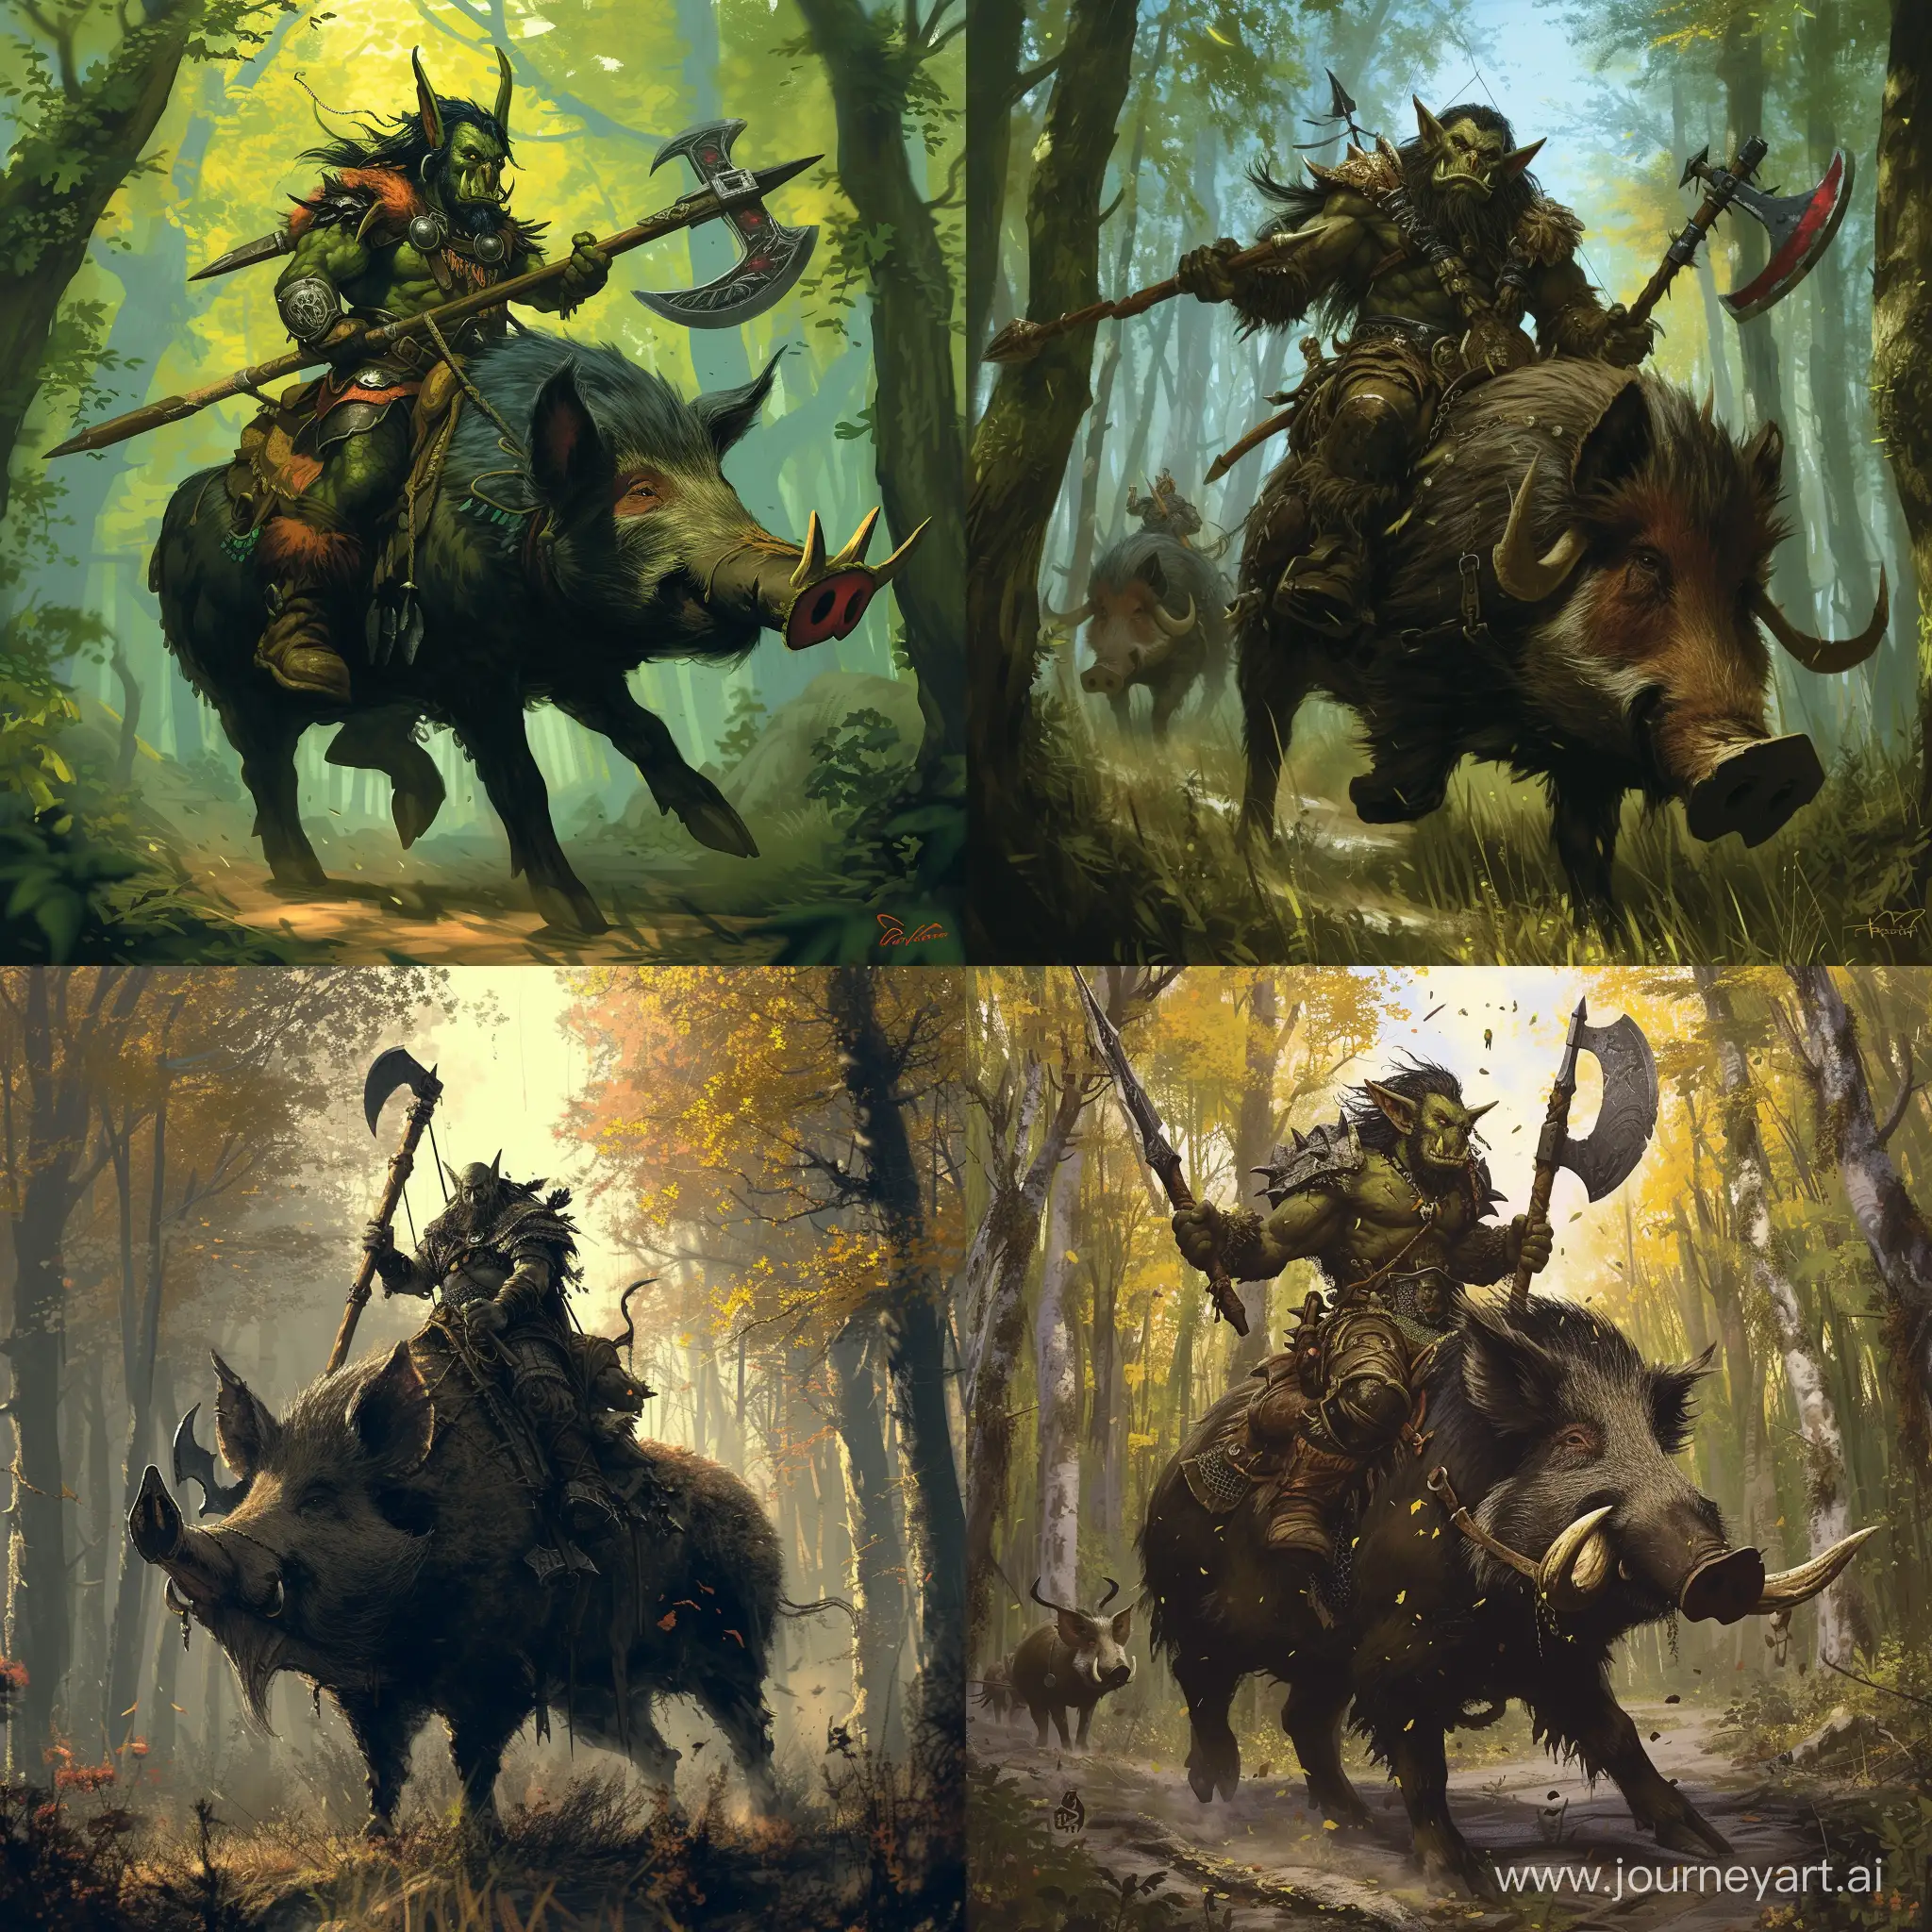 Fierce-Orc-Rider-with-Halberd-on-Wild-Boar-in-Enchanted-Forest